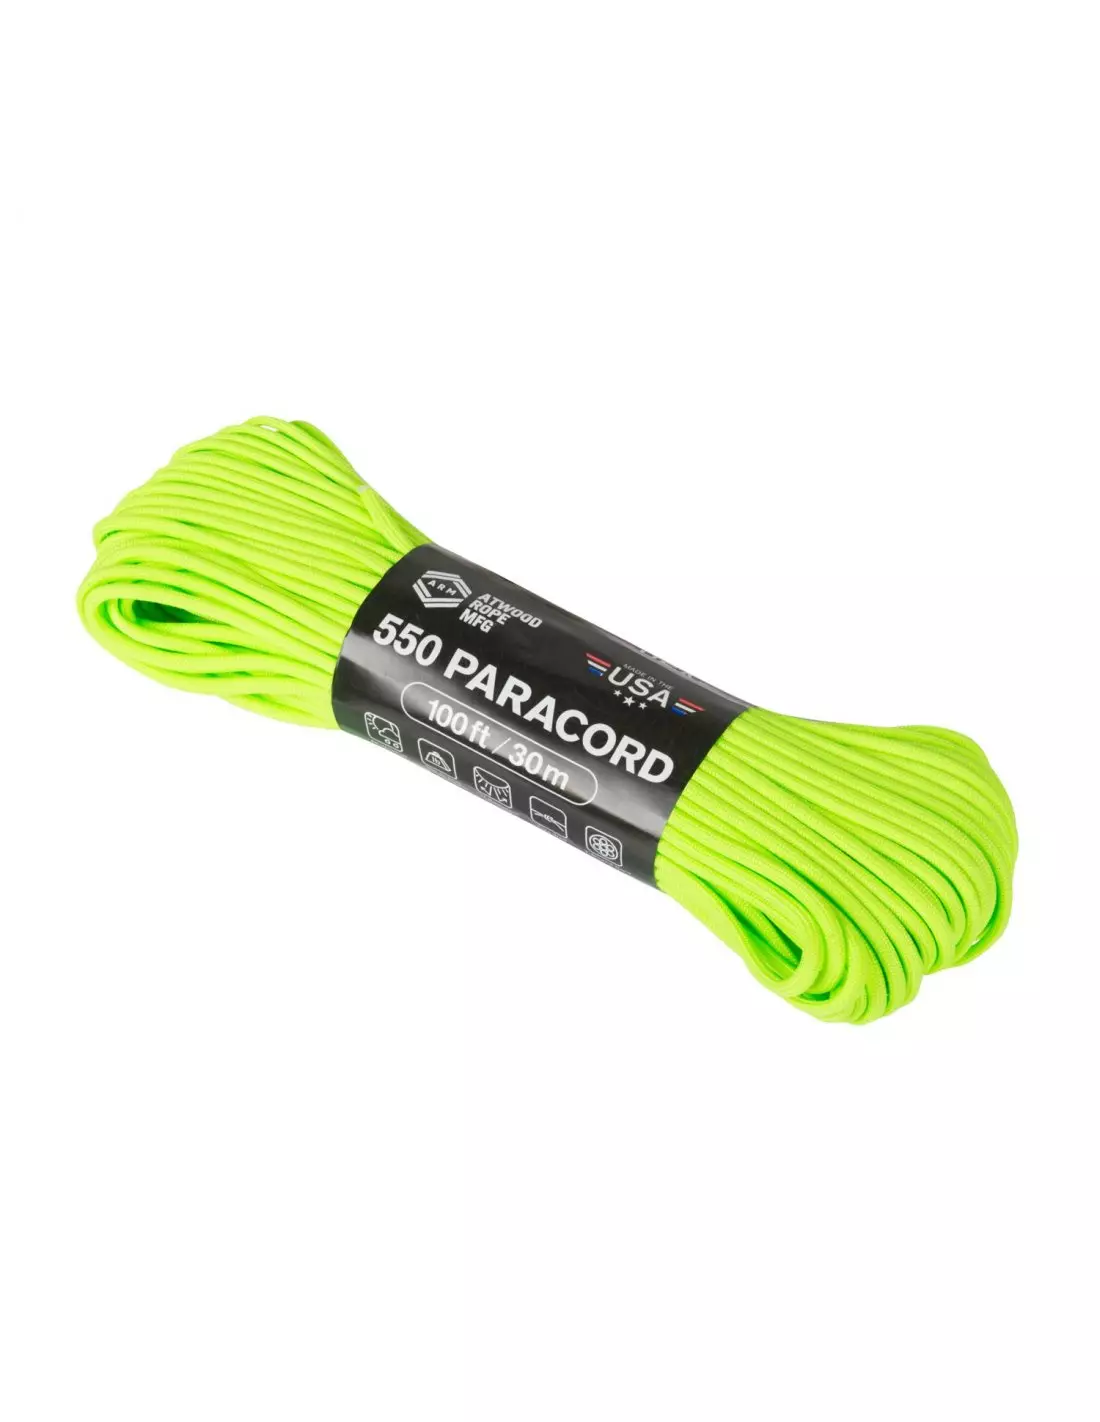 Atwood® 550 Paracord (100FT) - Neon Green